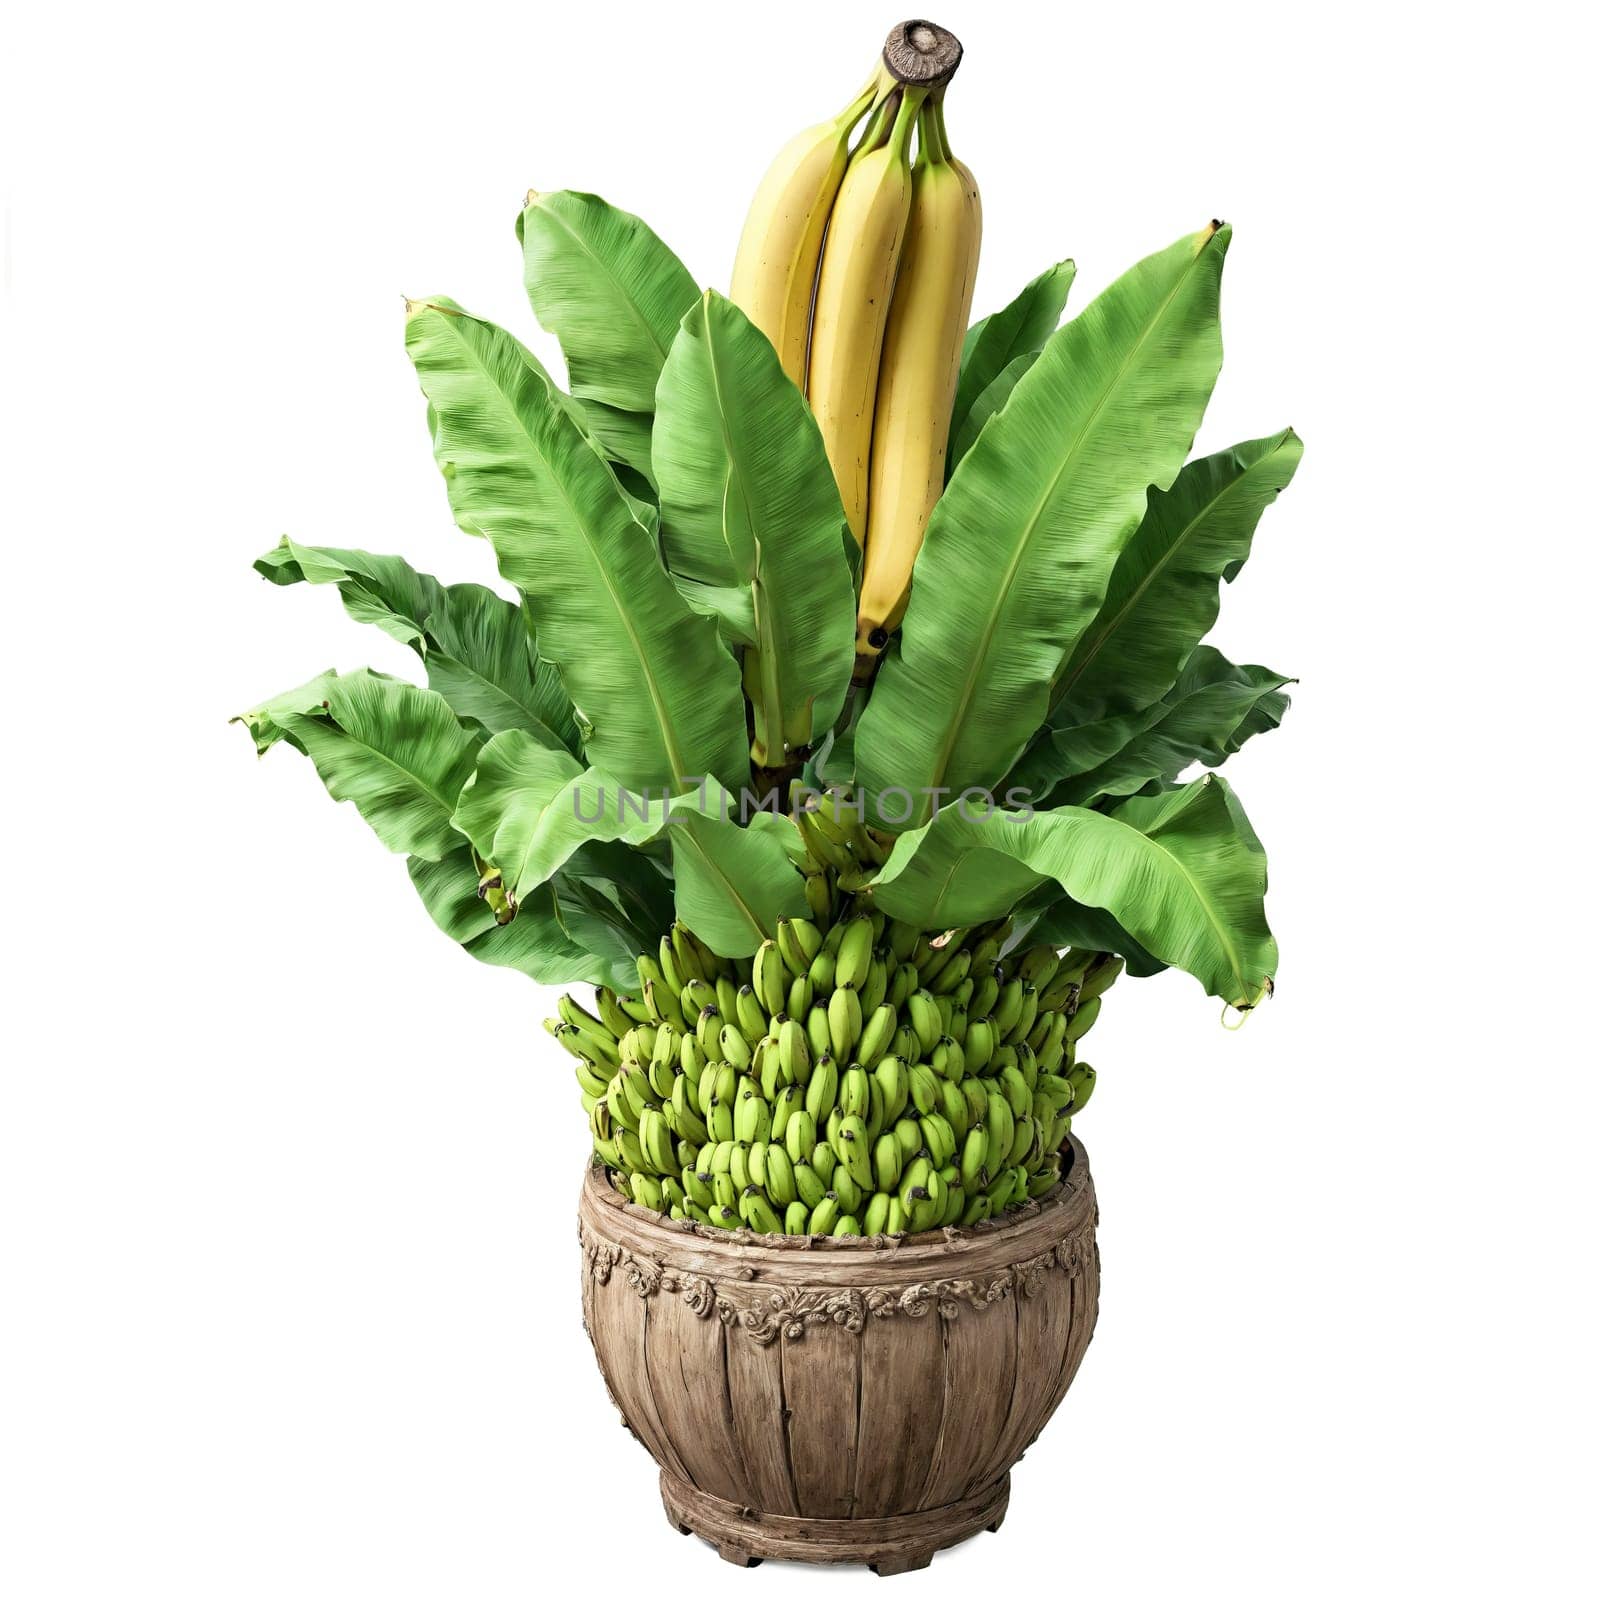 Gros Michel Banana large green leaves and long curved sweet banana fruits in a rustic by panophotograph